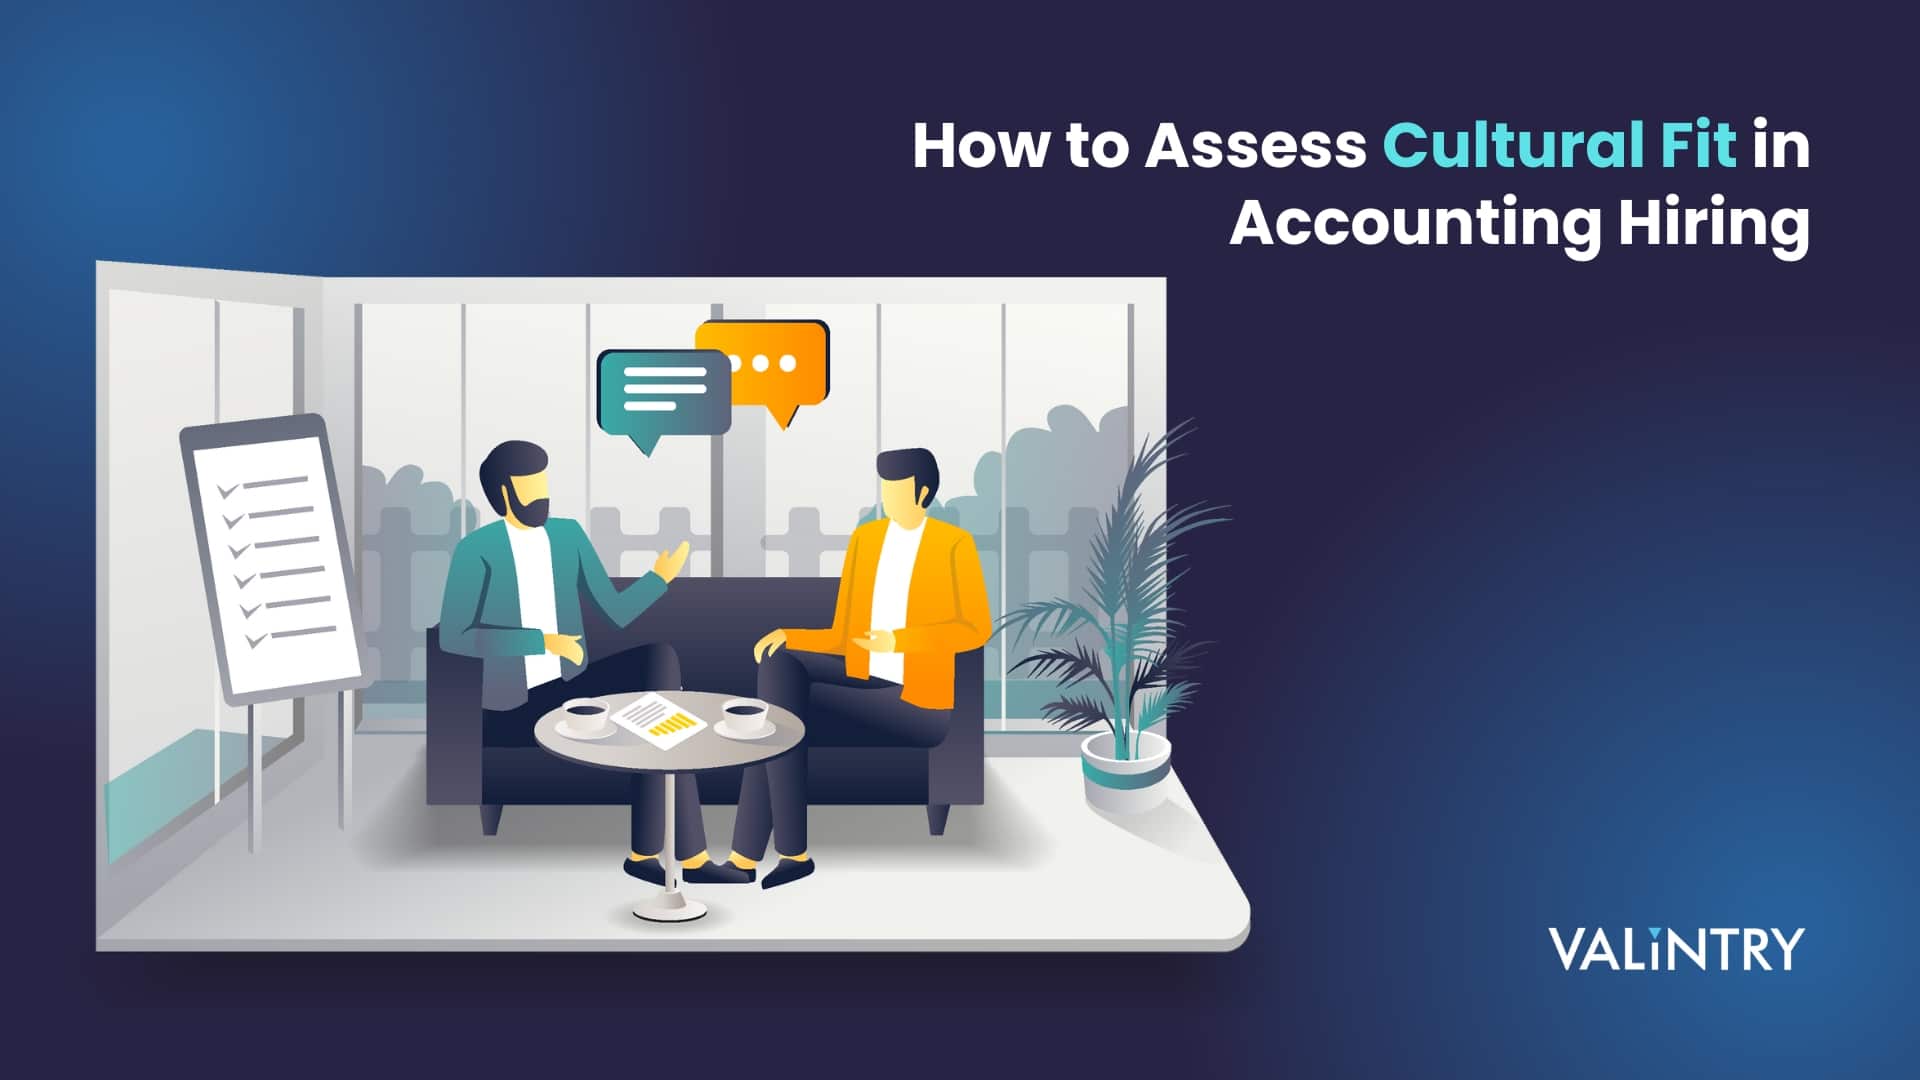 How to Assess Cultural Fit in Accounting Hiring